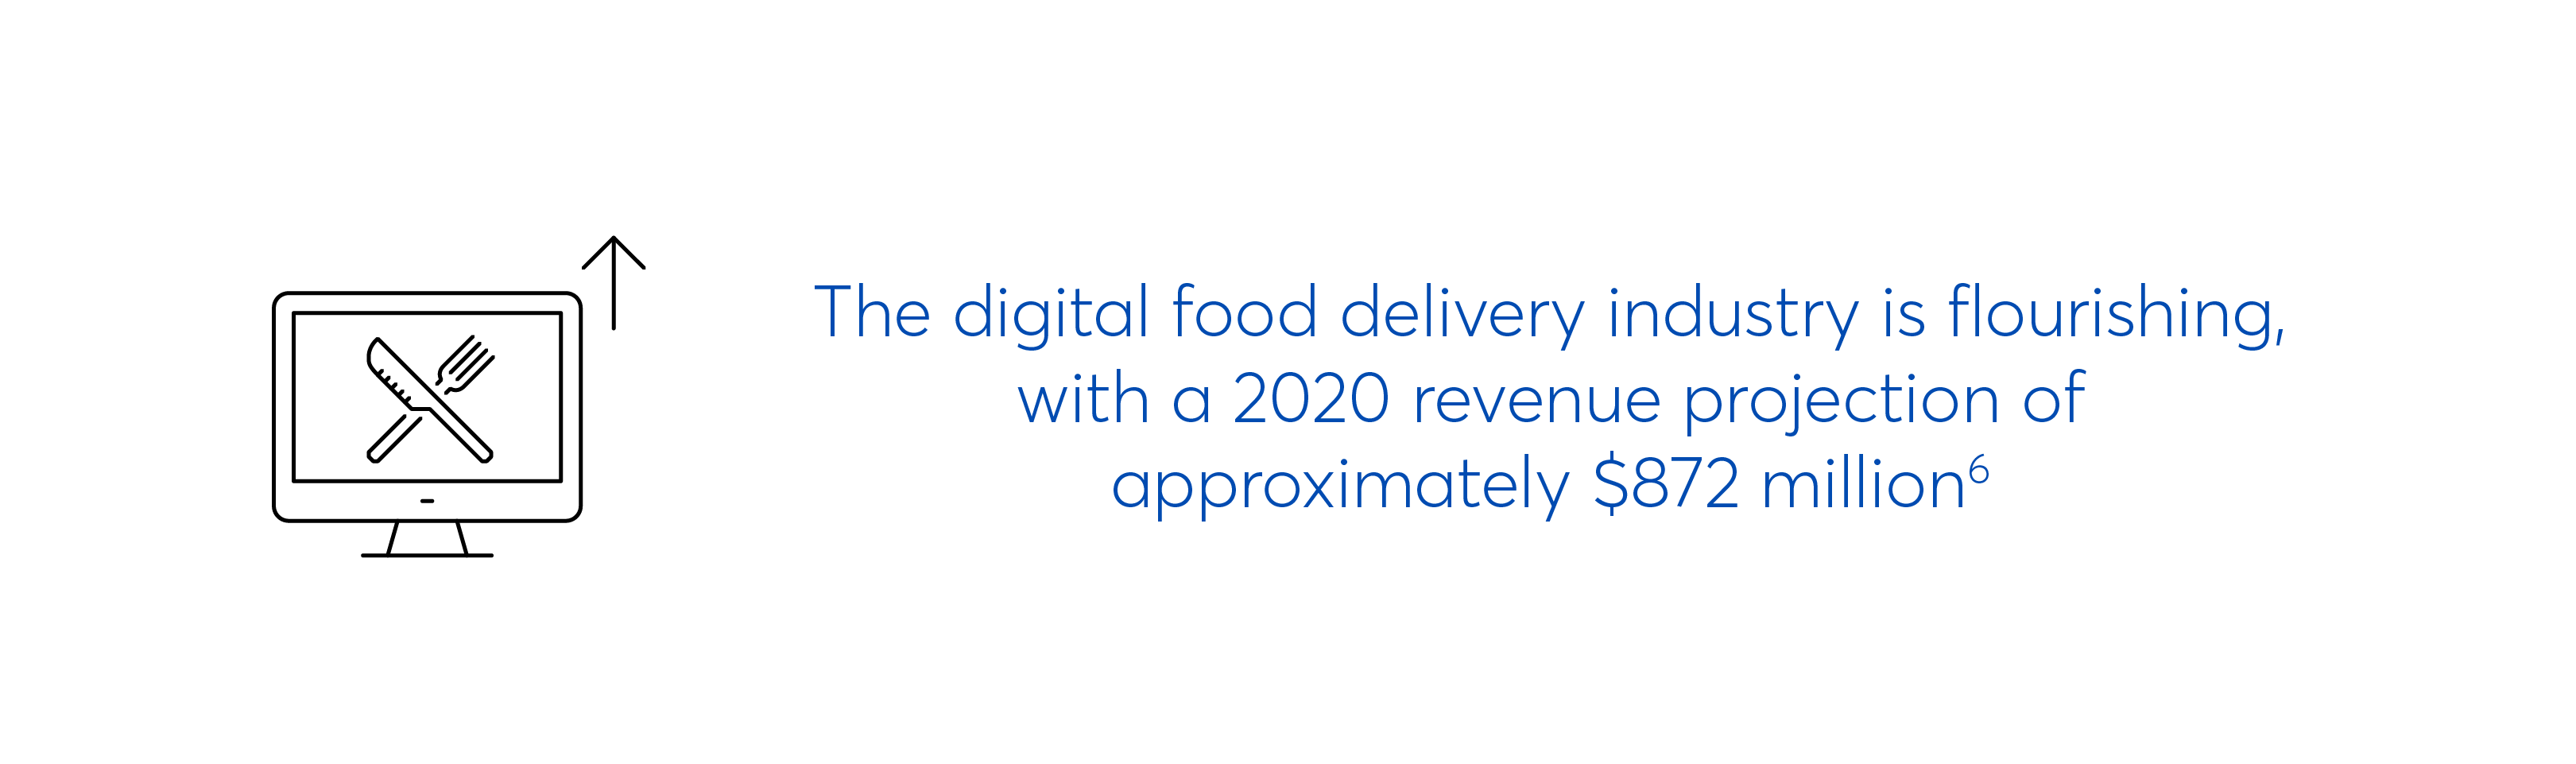 Digital food delivery service industry is flourishing